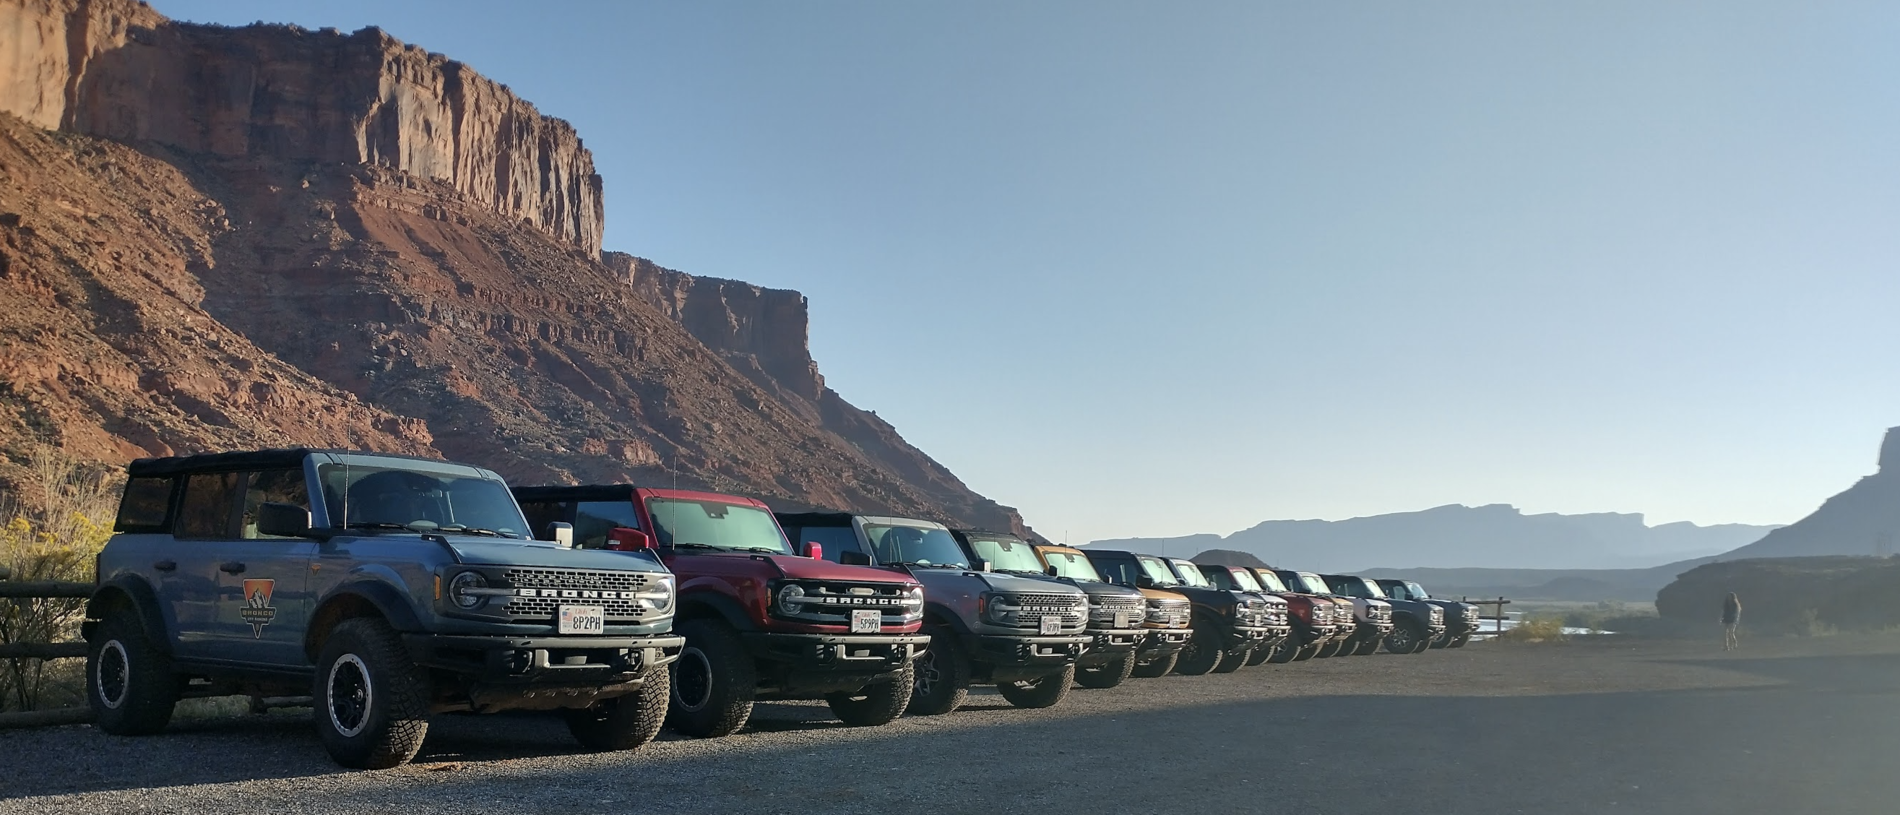 Ford Bronco Another Moab Review - strongly recommended C5B8A752-5CEF-40E9-A0A1-4426F4508F47